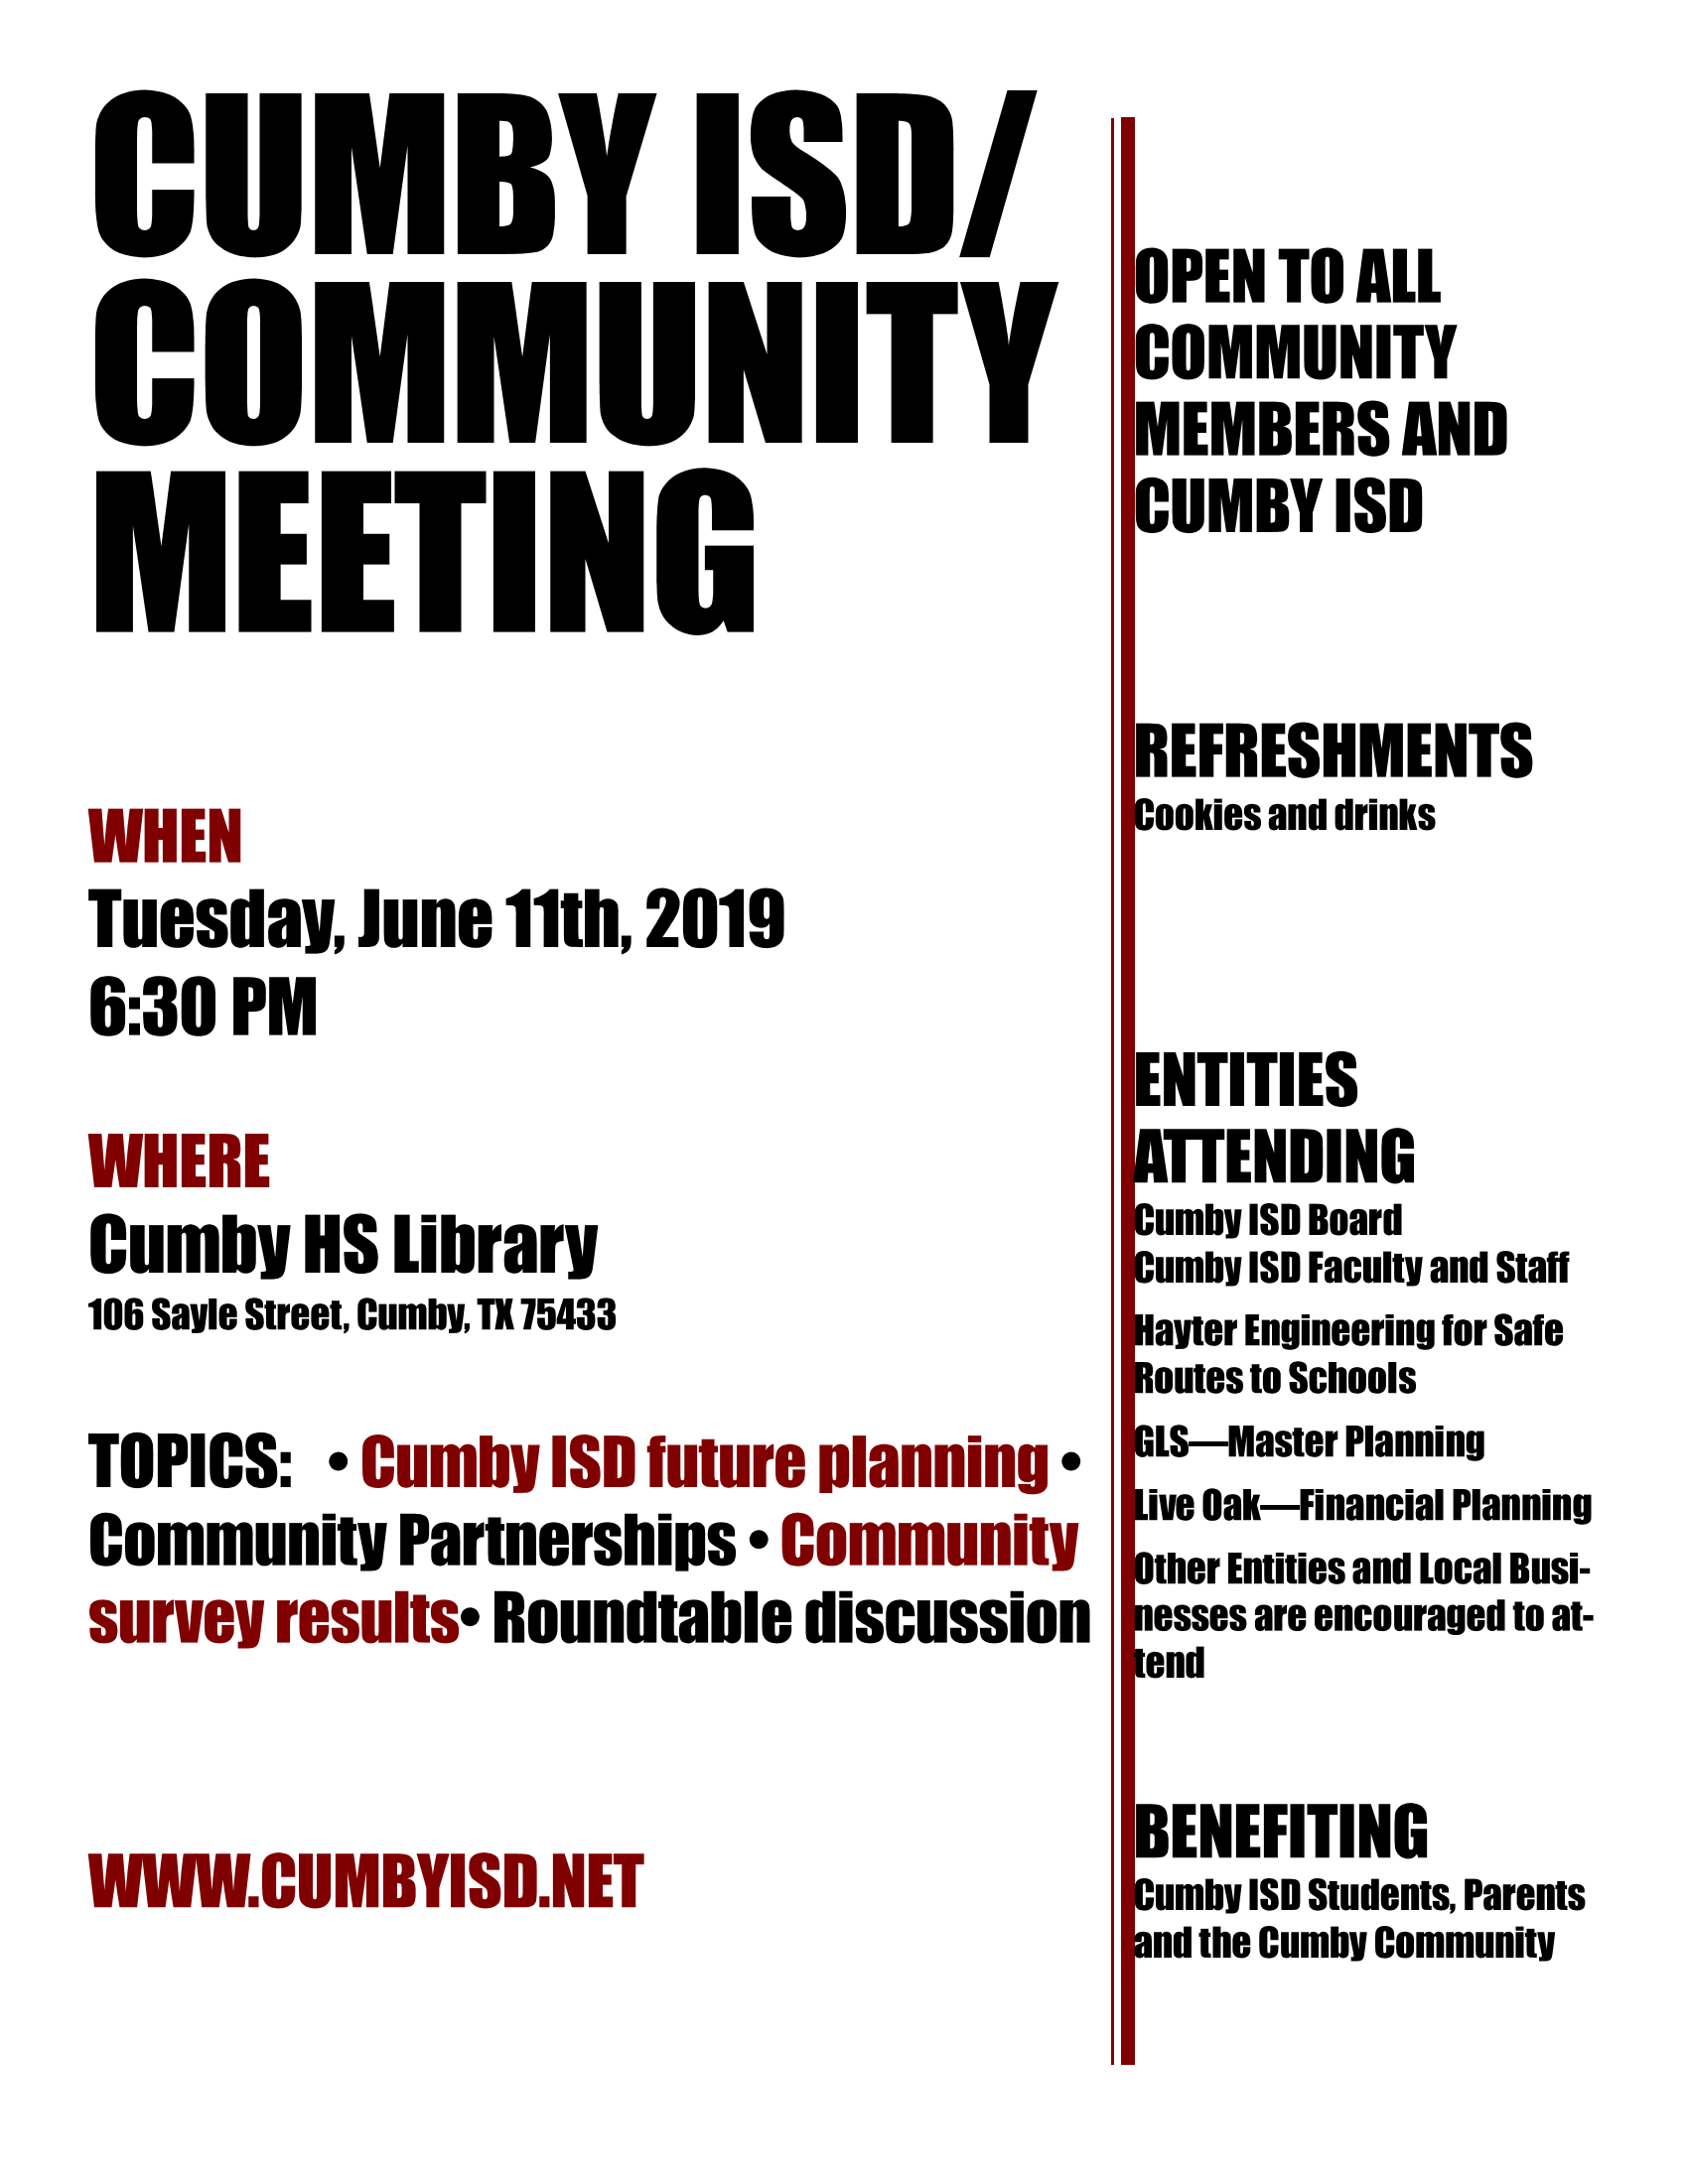 Cumby ISD Holding Community Meeting on June 11th